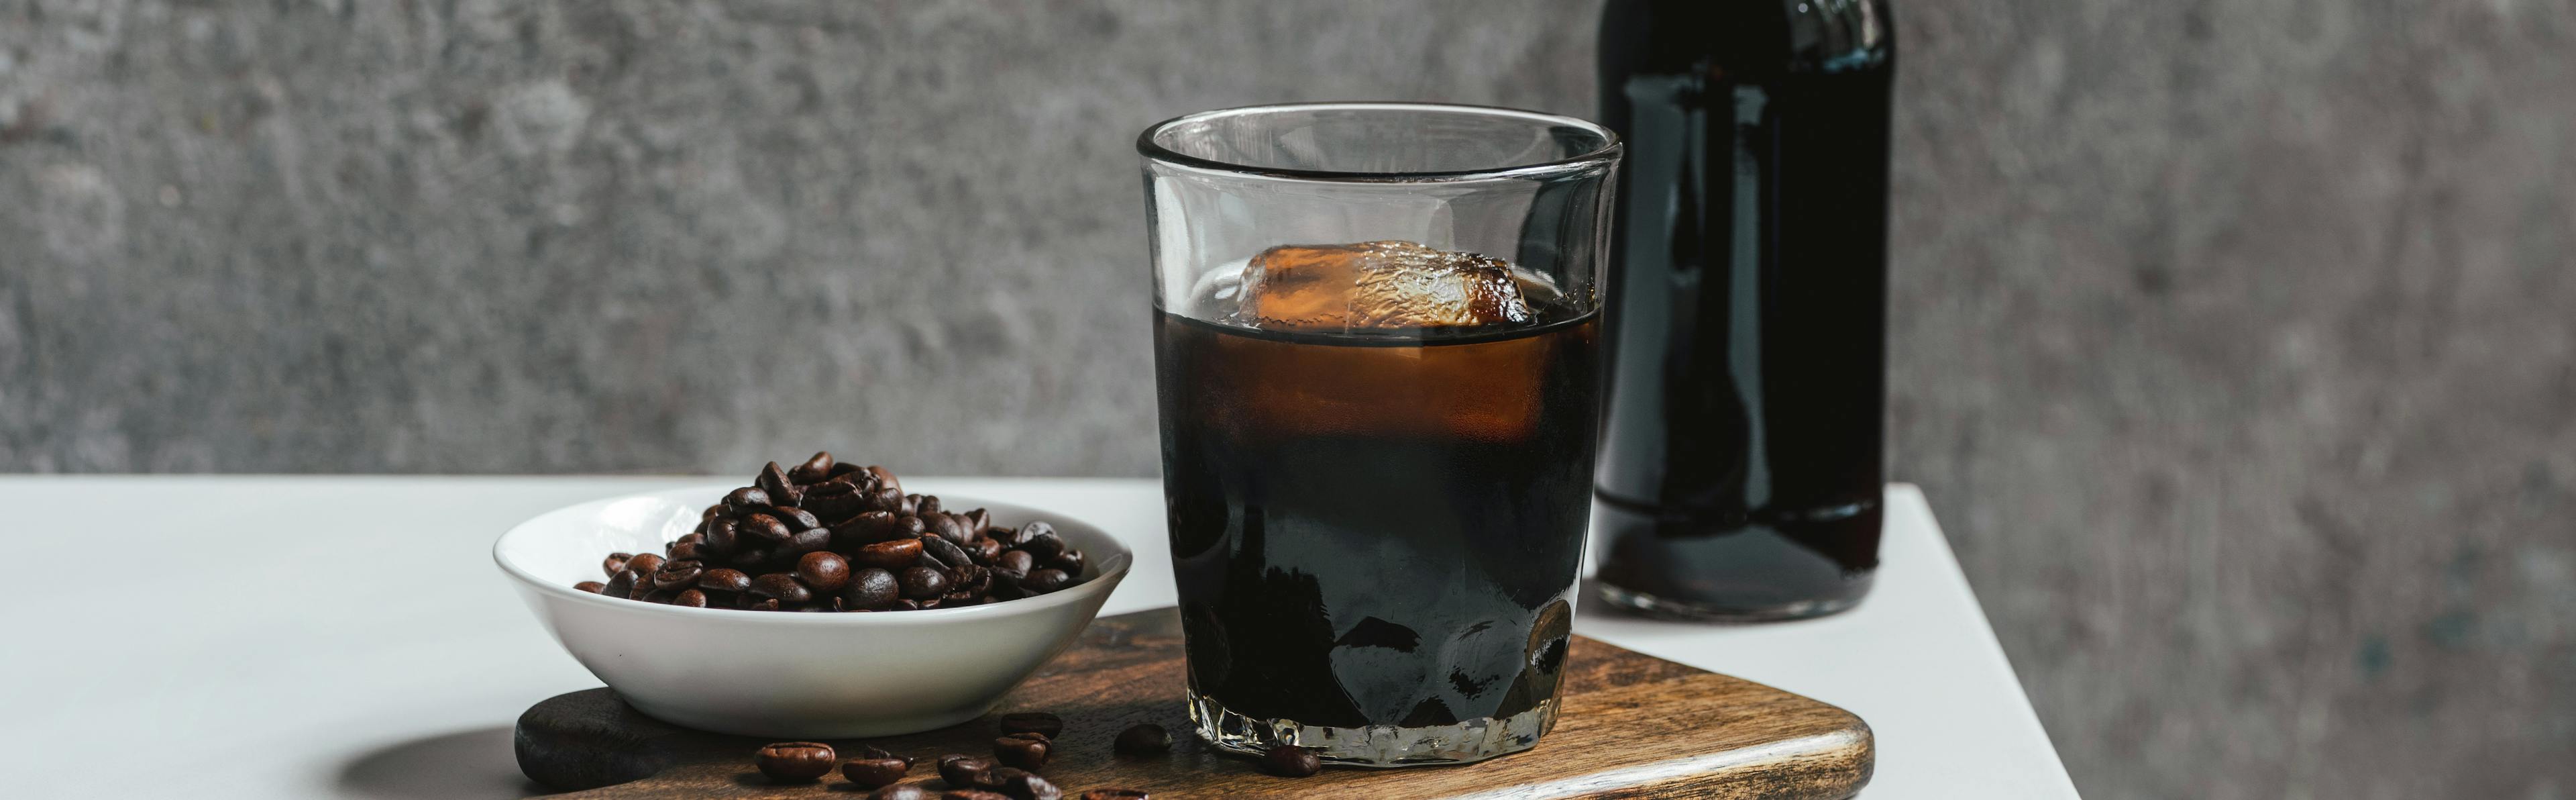 Grey Background with White Table in the Foreground holding a wooden cutting board with a white bowl of dark roasted coffee beans next to a glass of cold brew coffee with one large cube of ice